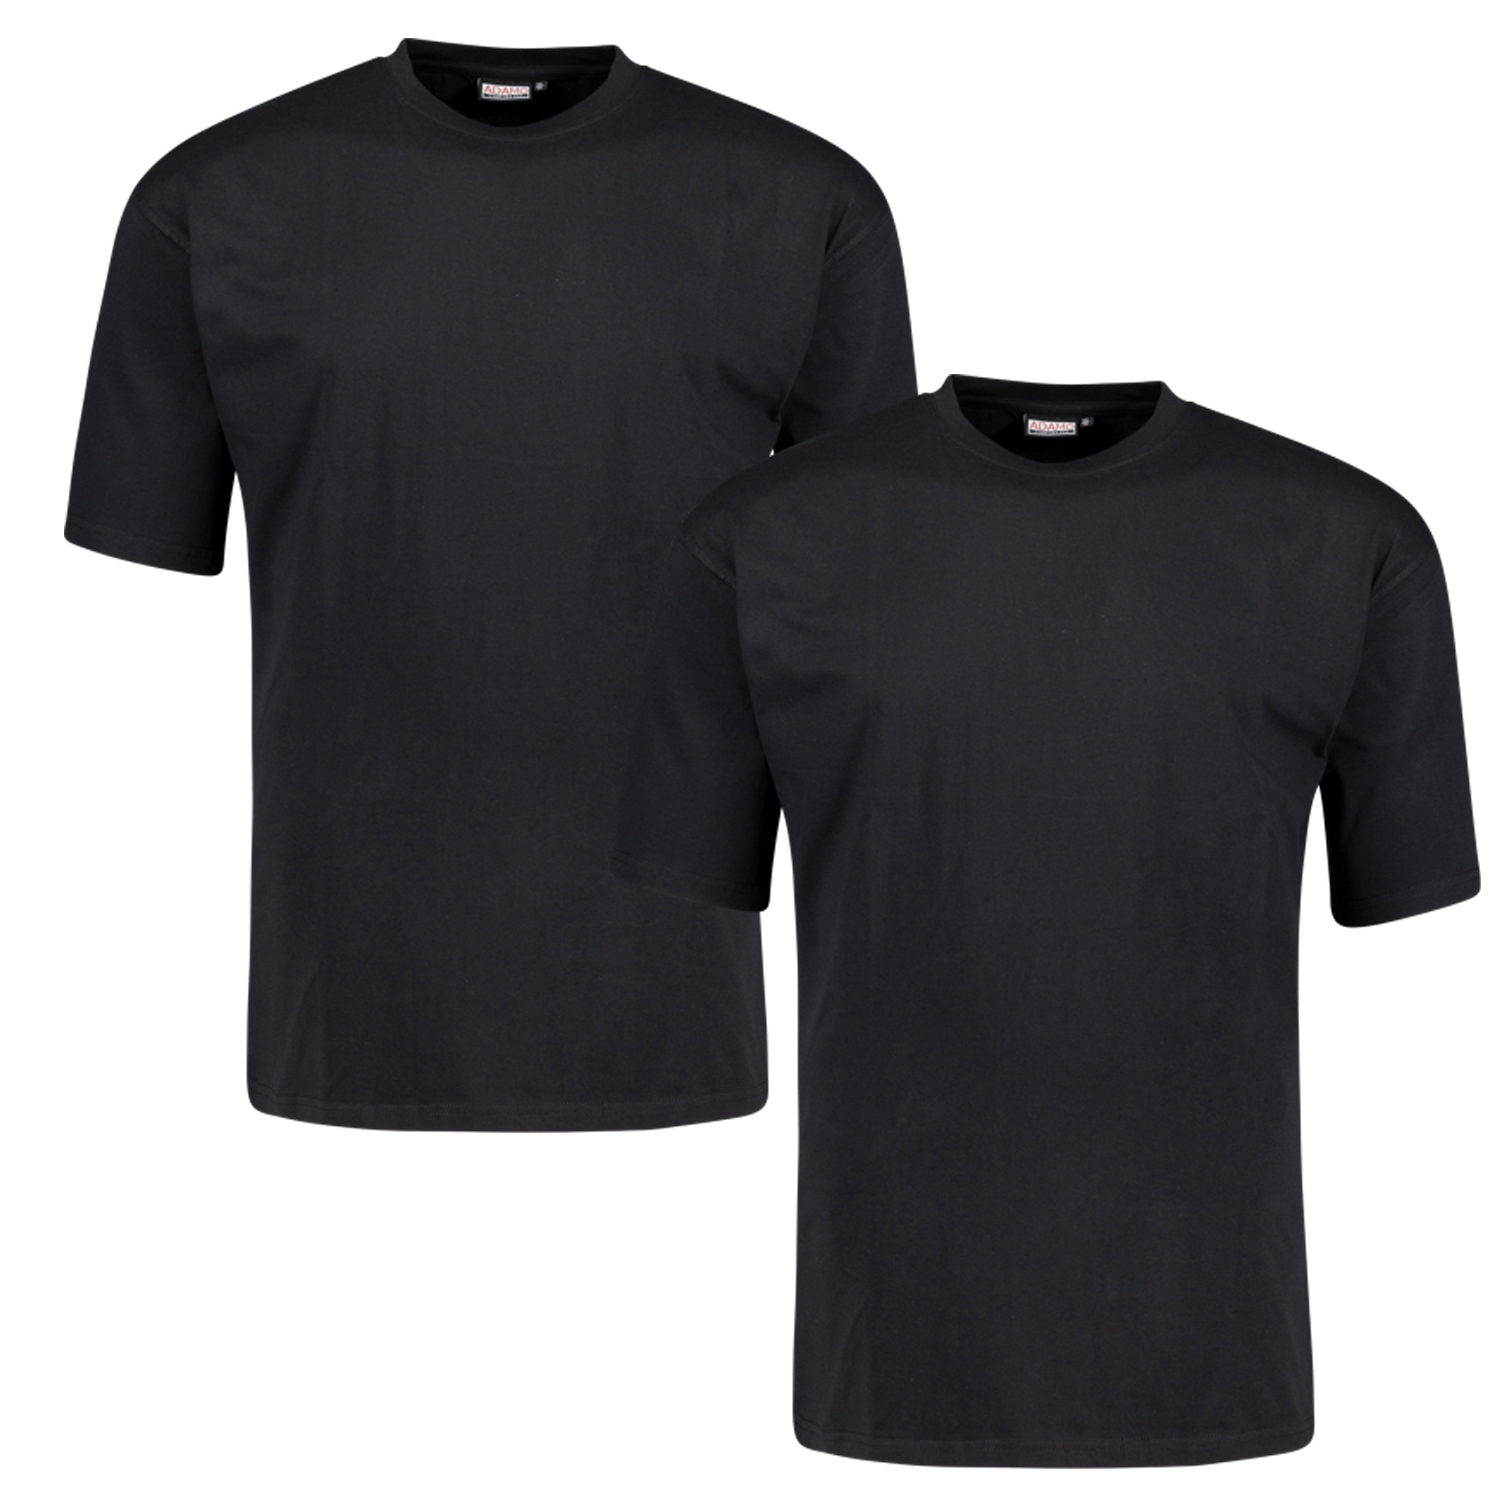 Black double pack Marlon COMFORT FIT t-shirt by ADAMO up to kingsize 18XL